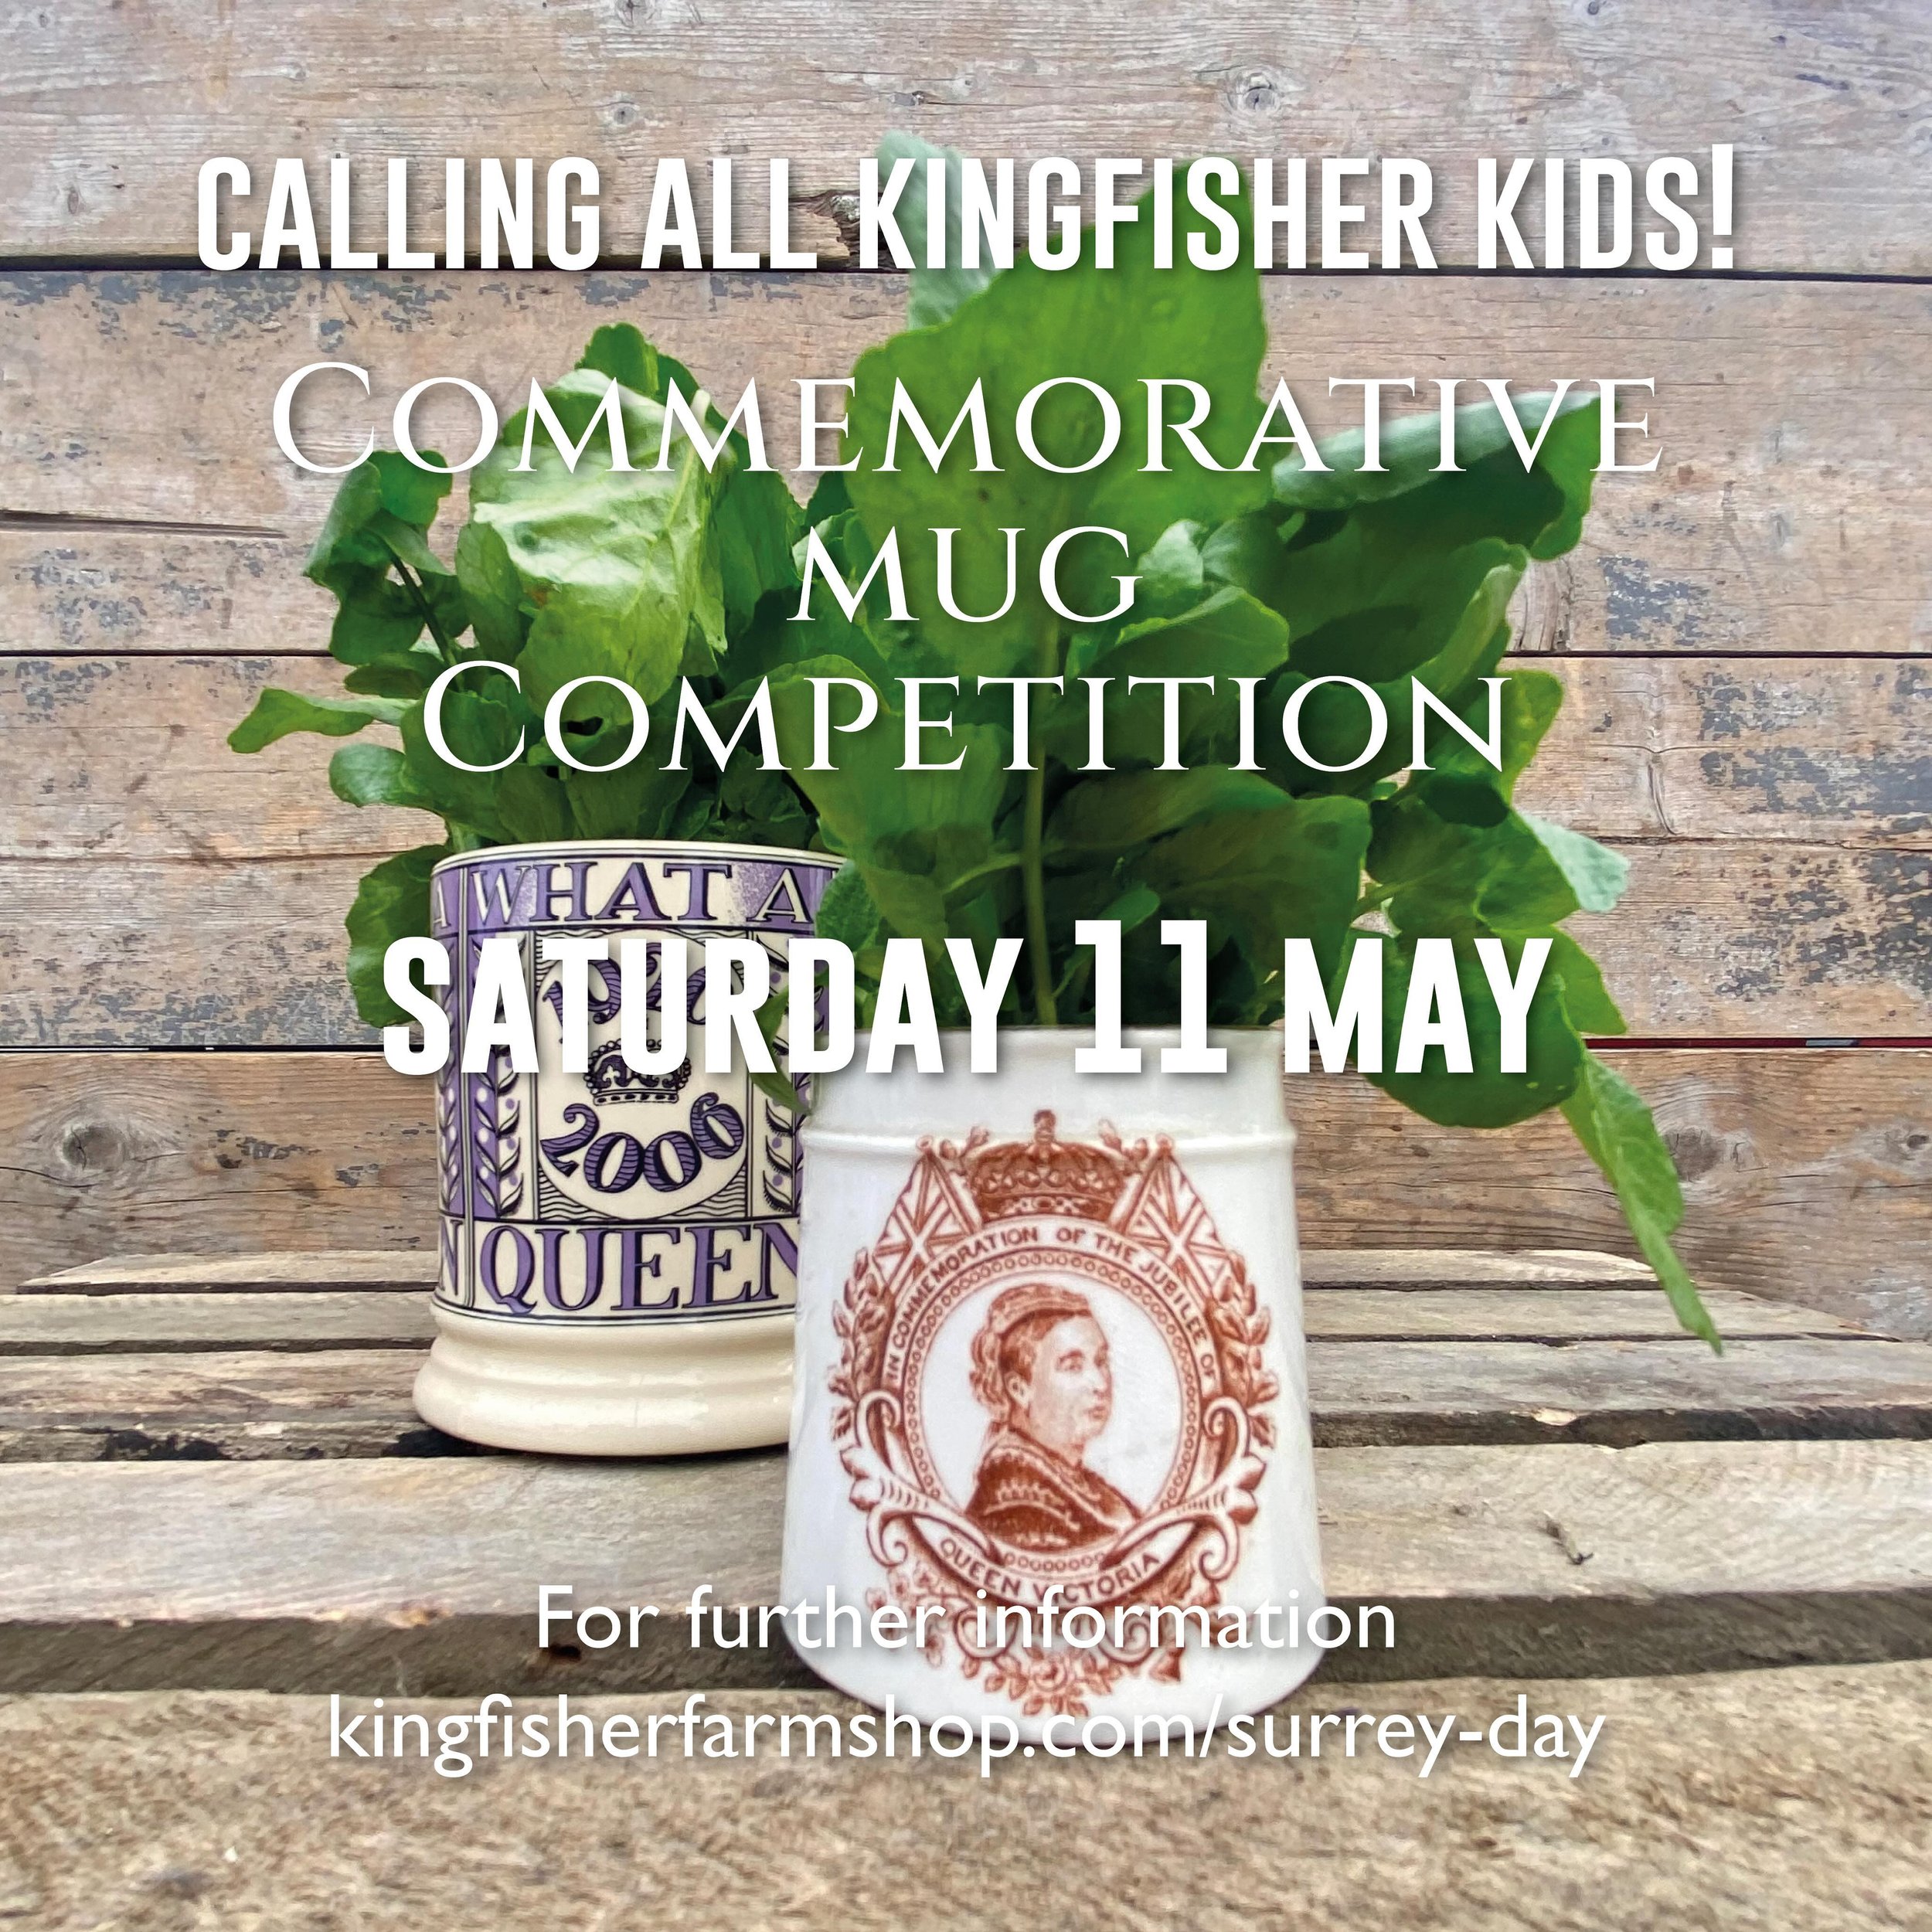 Not one, but two competitions! Here&rsquo;s one for our little Kingfishers. 

We are celebrating 170 years of growing watercress. We would like you to design a mug to mark the occasion. Commemorative mugs have marked many historic occasions in Britis